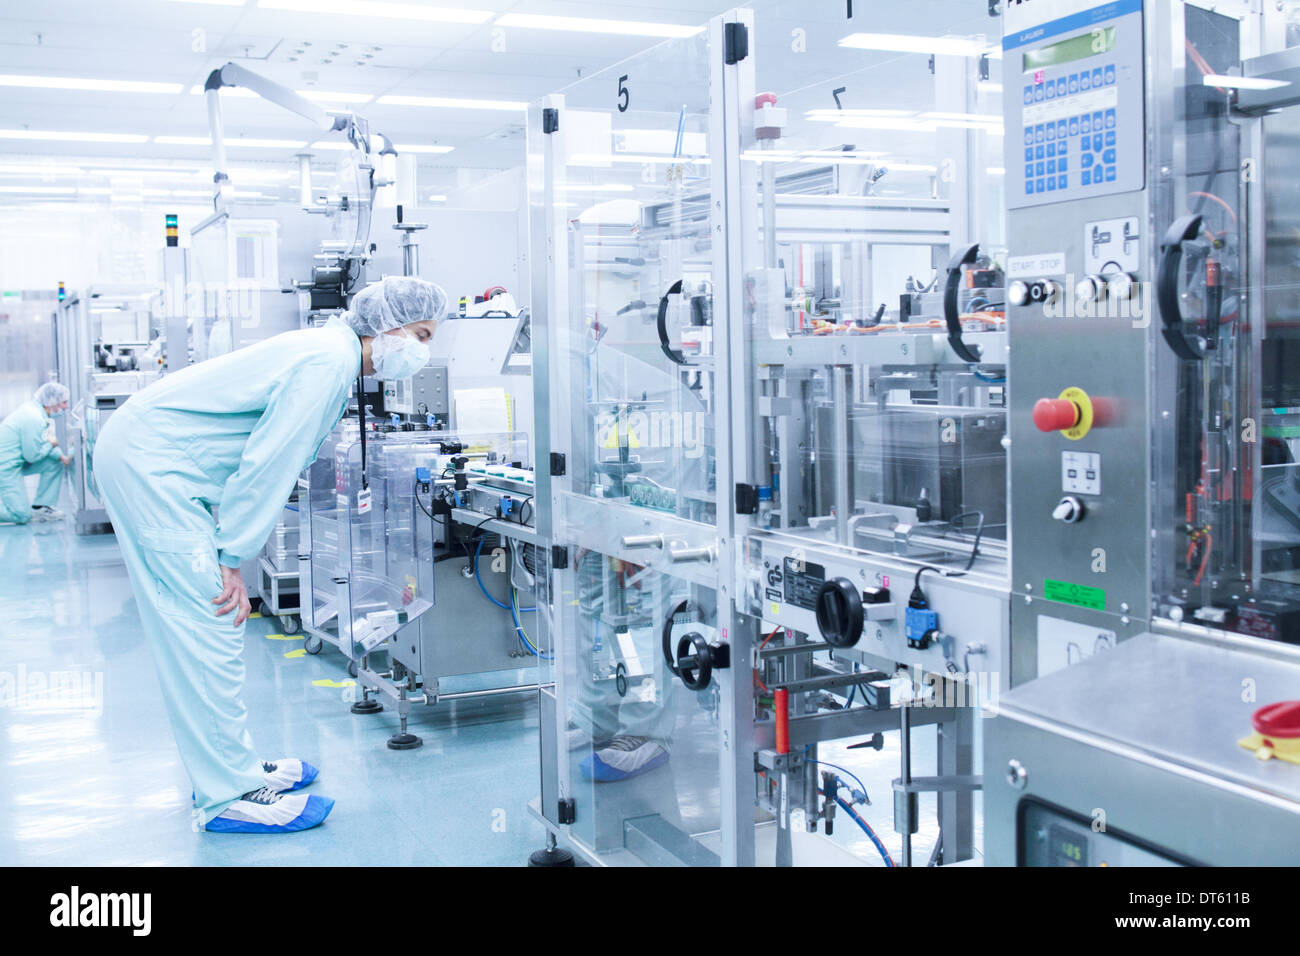 Laboratory technician bending to take closer look at machine Stock Photo